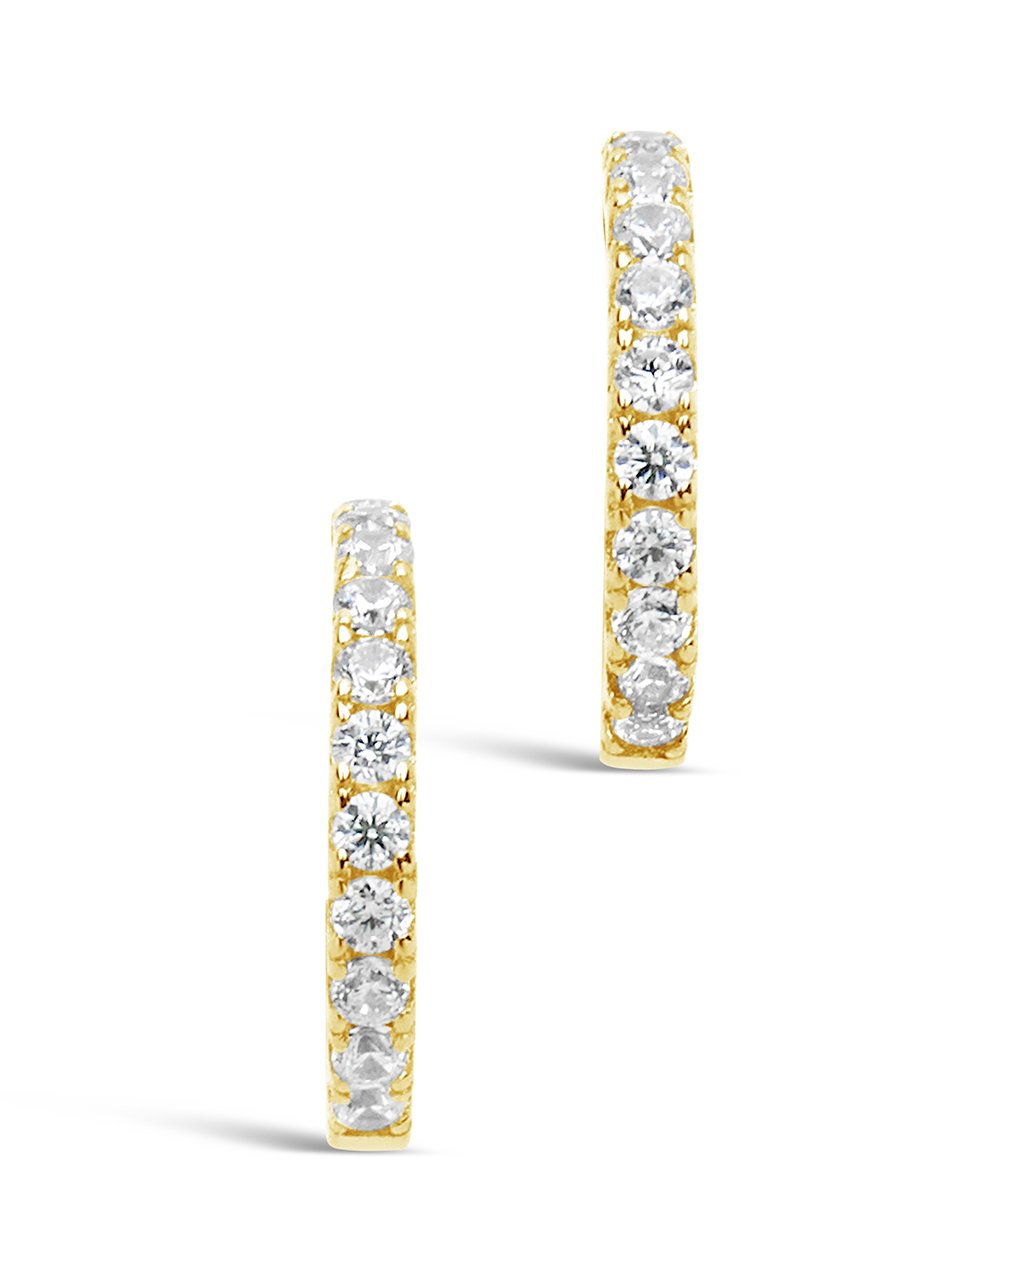 14K Gold Plated Sterling Silver Delicate Pave CZ Micro Hoops by Sterling Forever